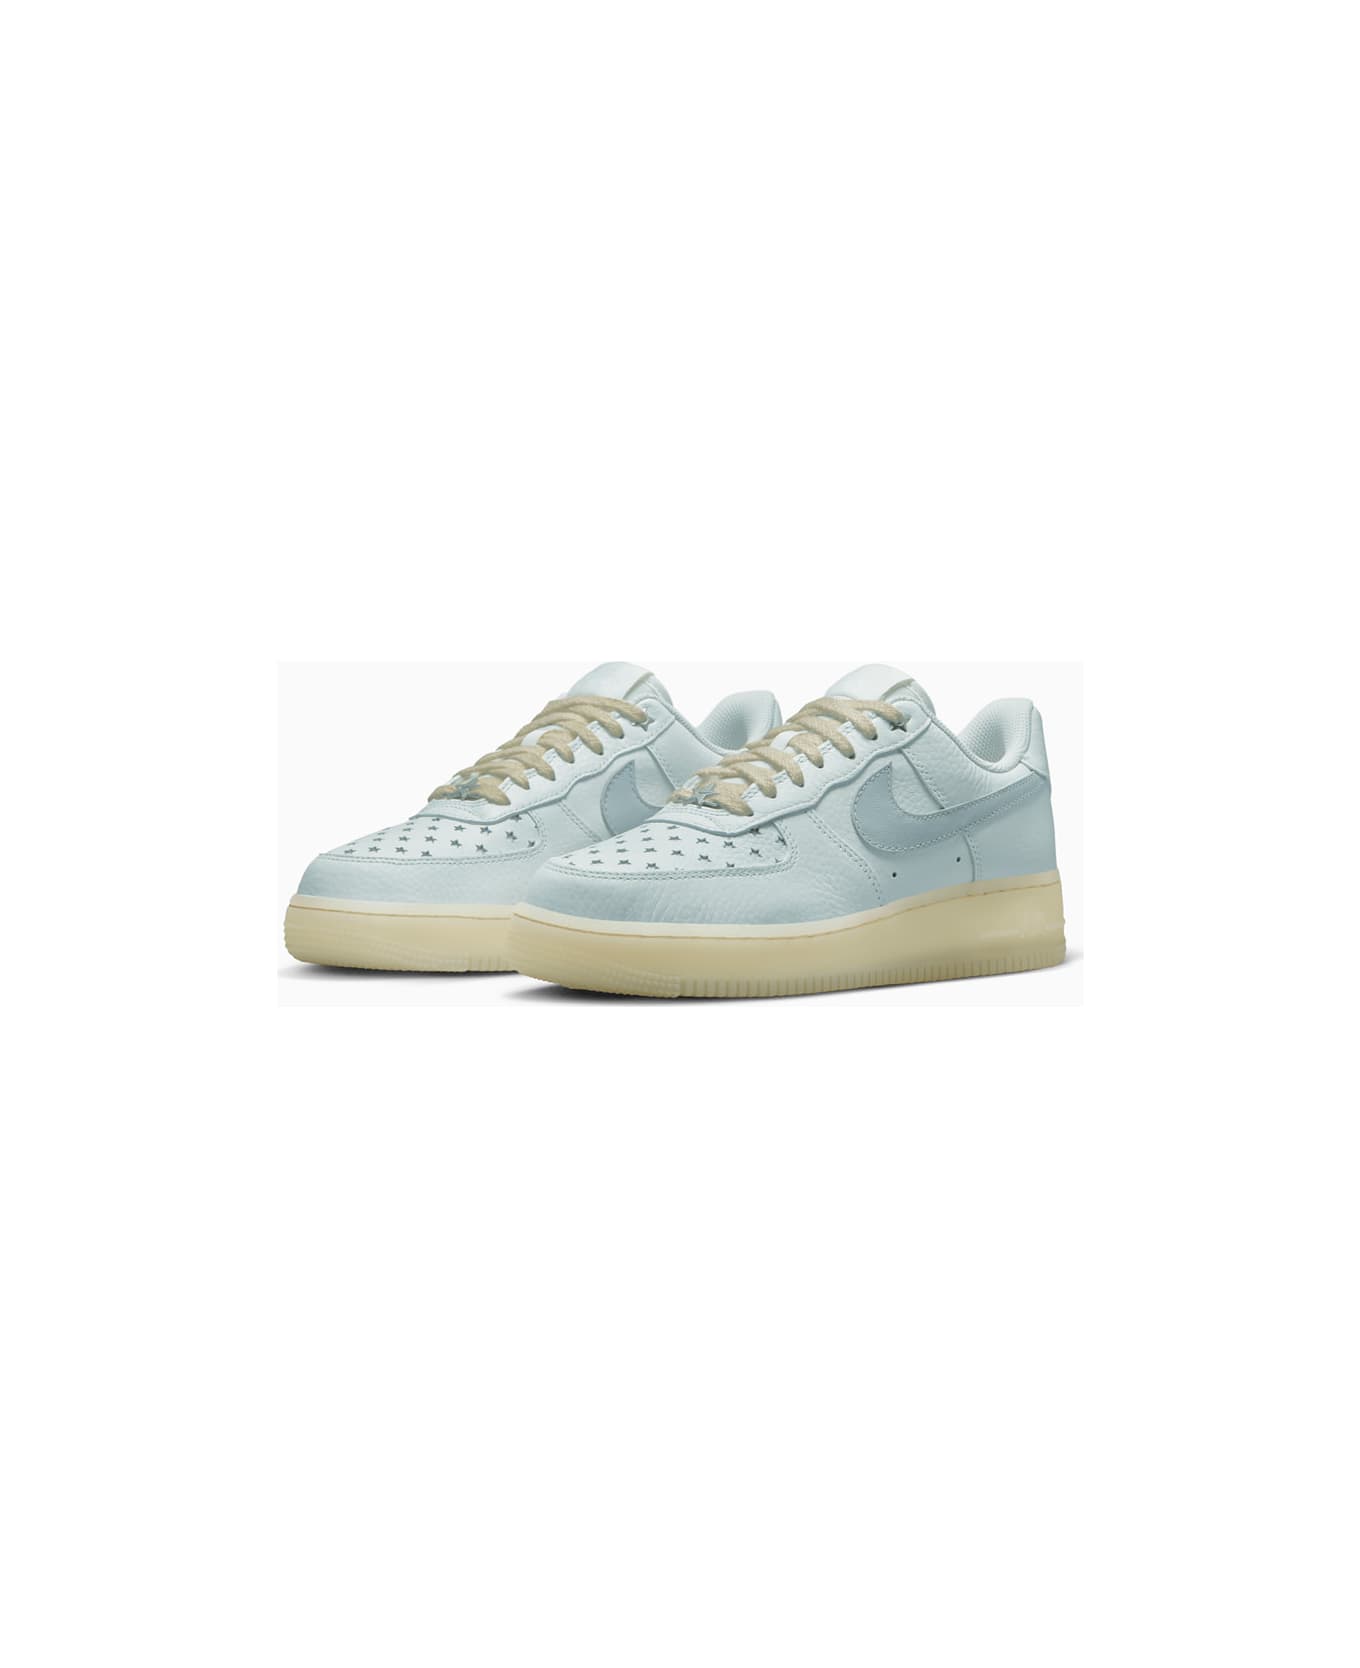 Nike Air Force 1 '07 Sneakers Fd0793-100 - White スニーカー